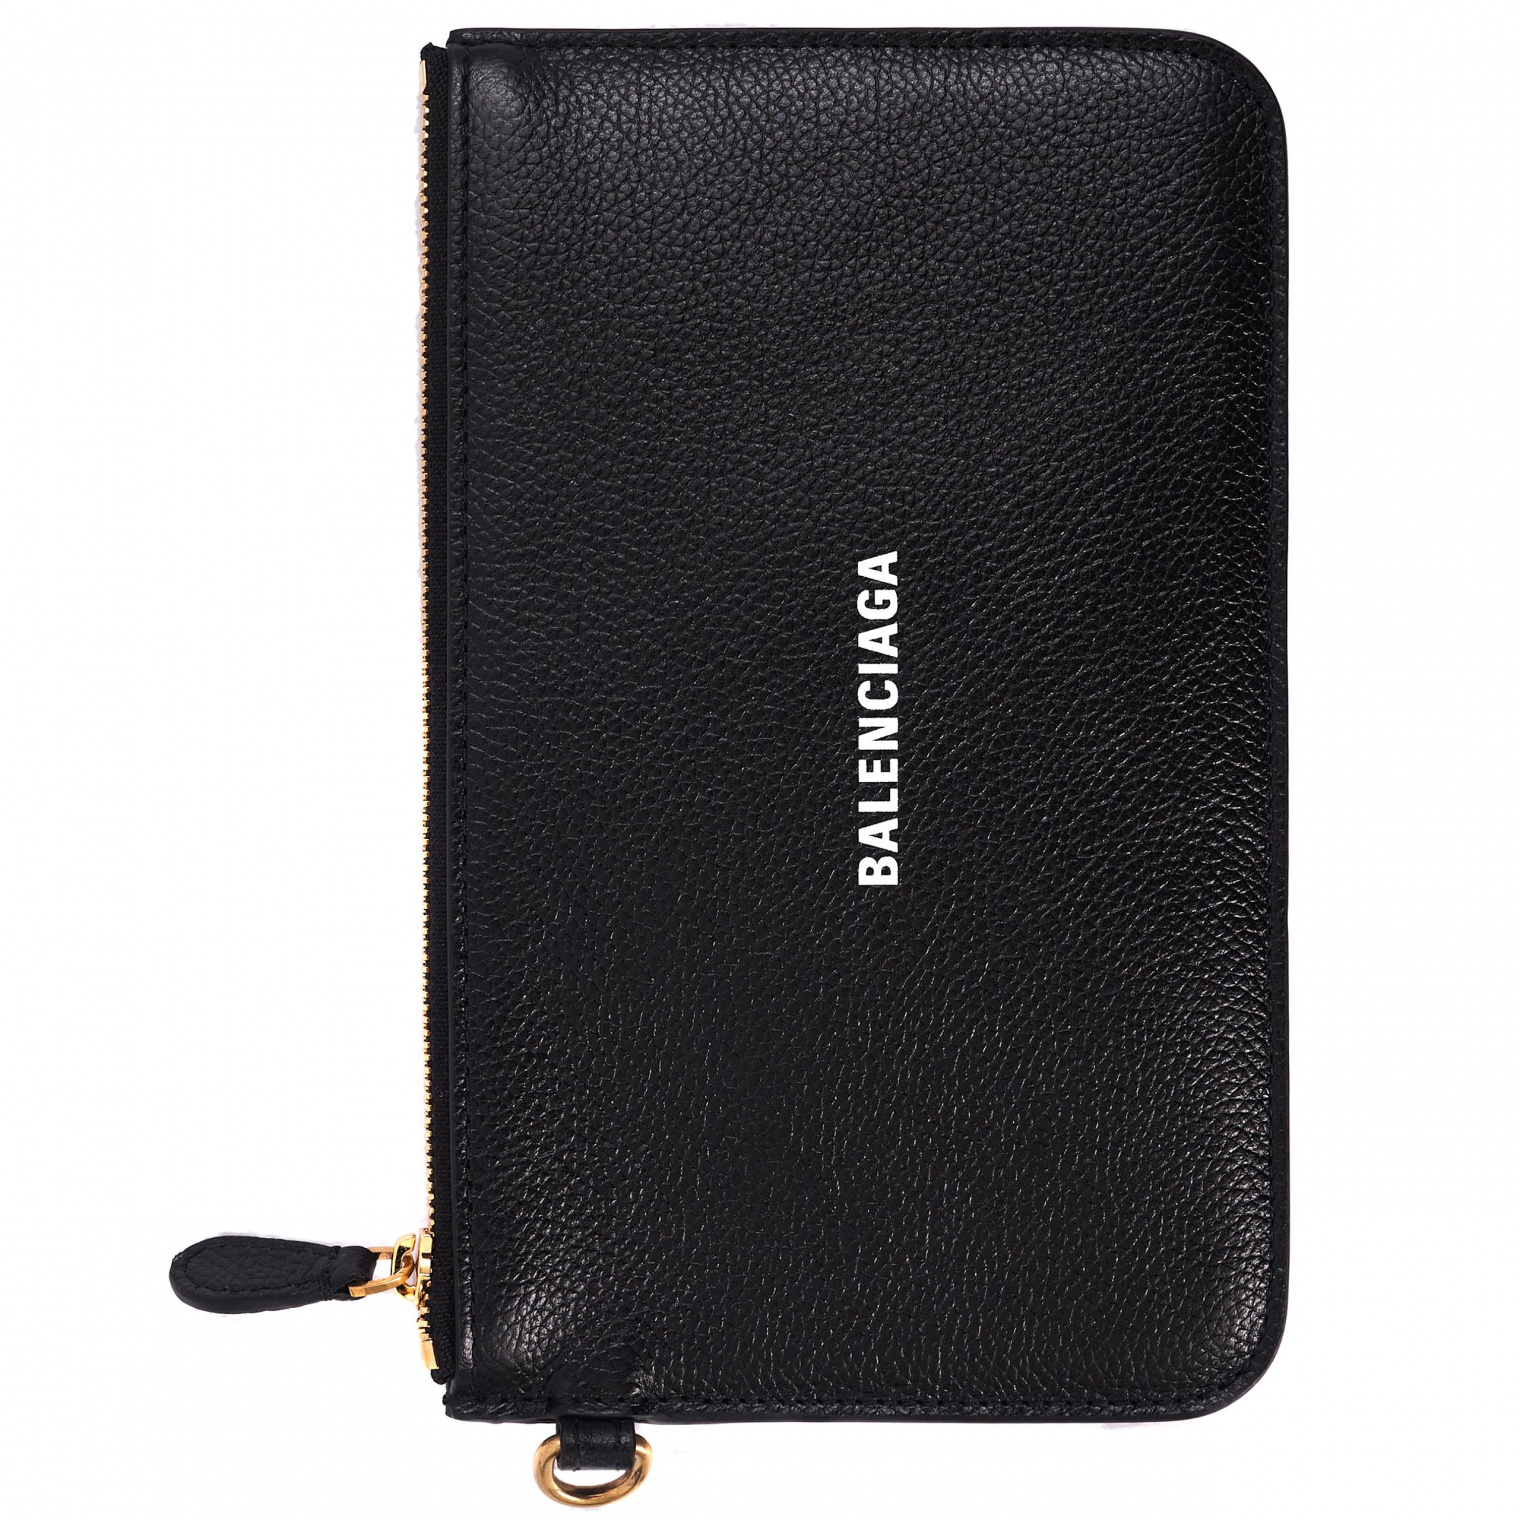 Balenciaga Cash Wallet in Black Grained Leather